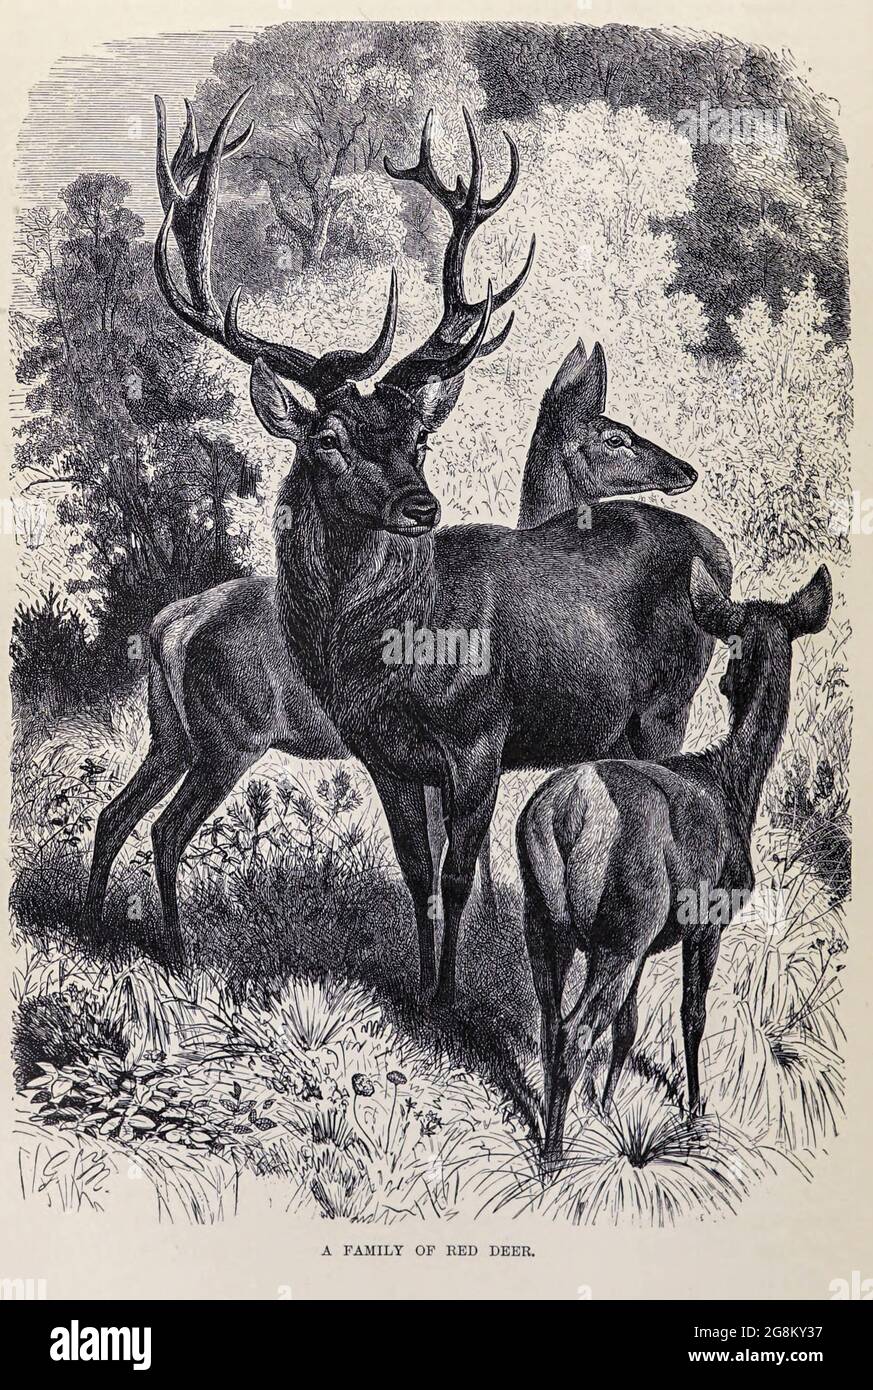 A family of Red Deer (Cervus elaphus) From the book ' Royal Natural History ' Volume 2 Edited by Richard Lydekker, Published in London by Frederick Warne & Co in 1893-1894 Stock Photo